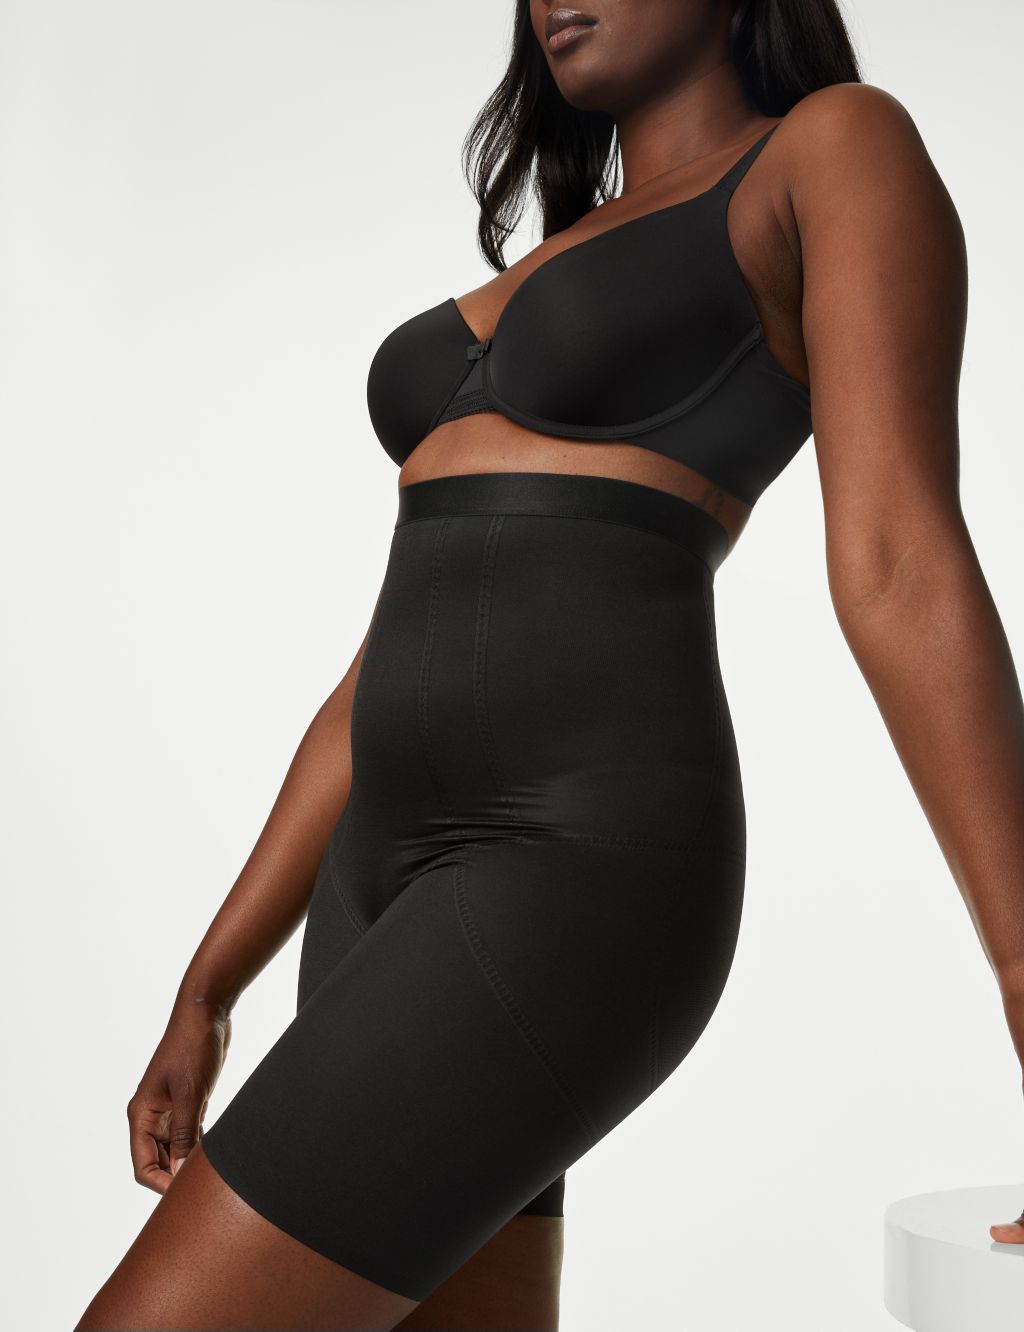 Find Cheap, Fashionable and Slimming m and s body shapers 